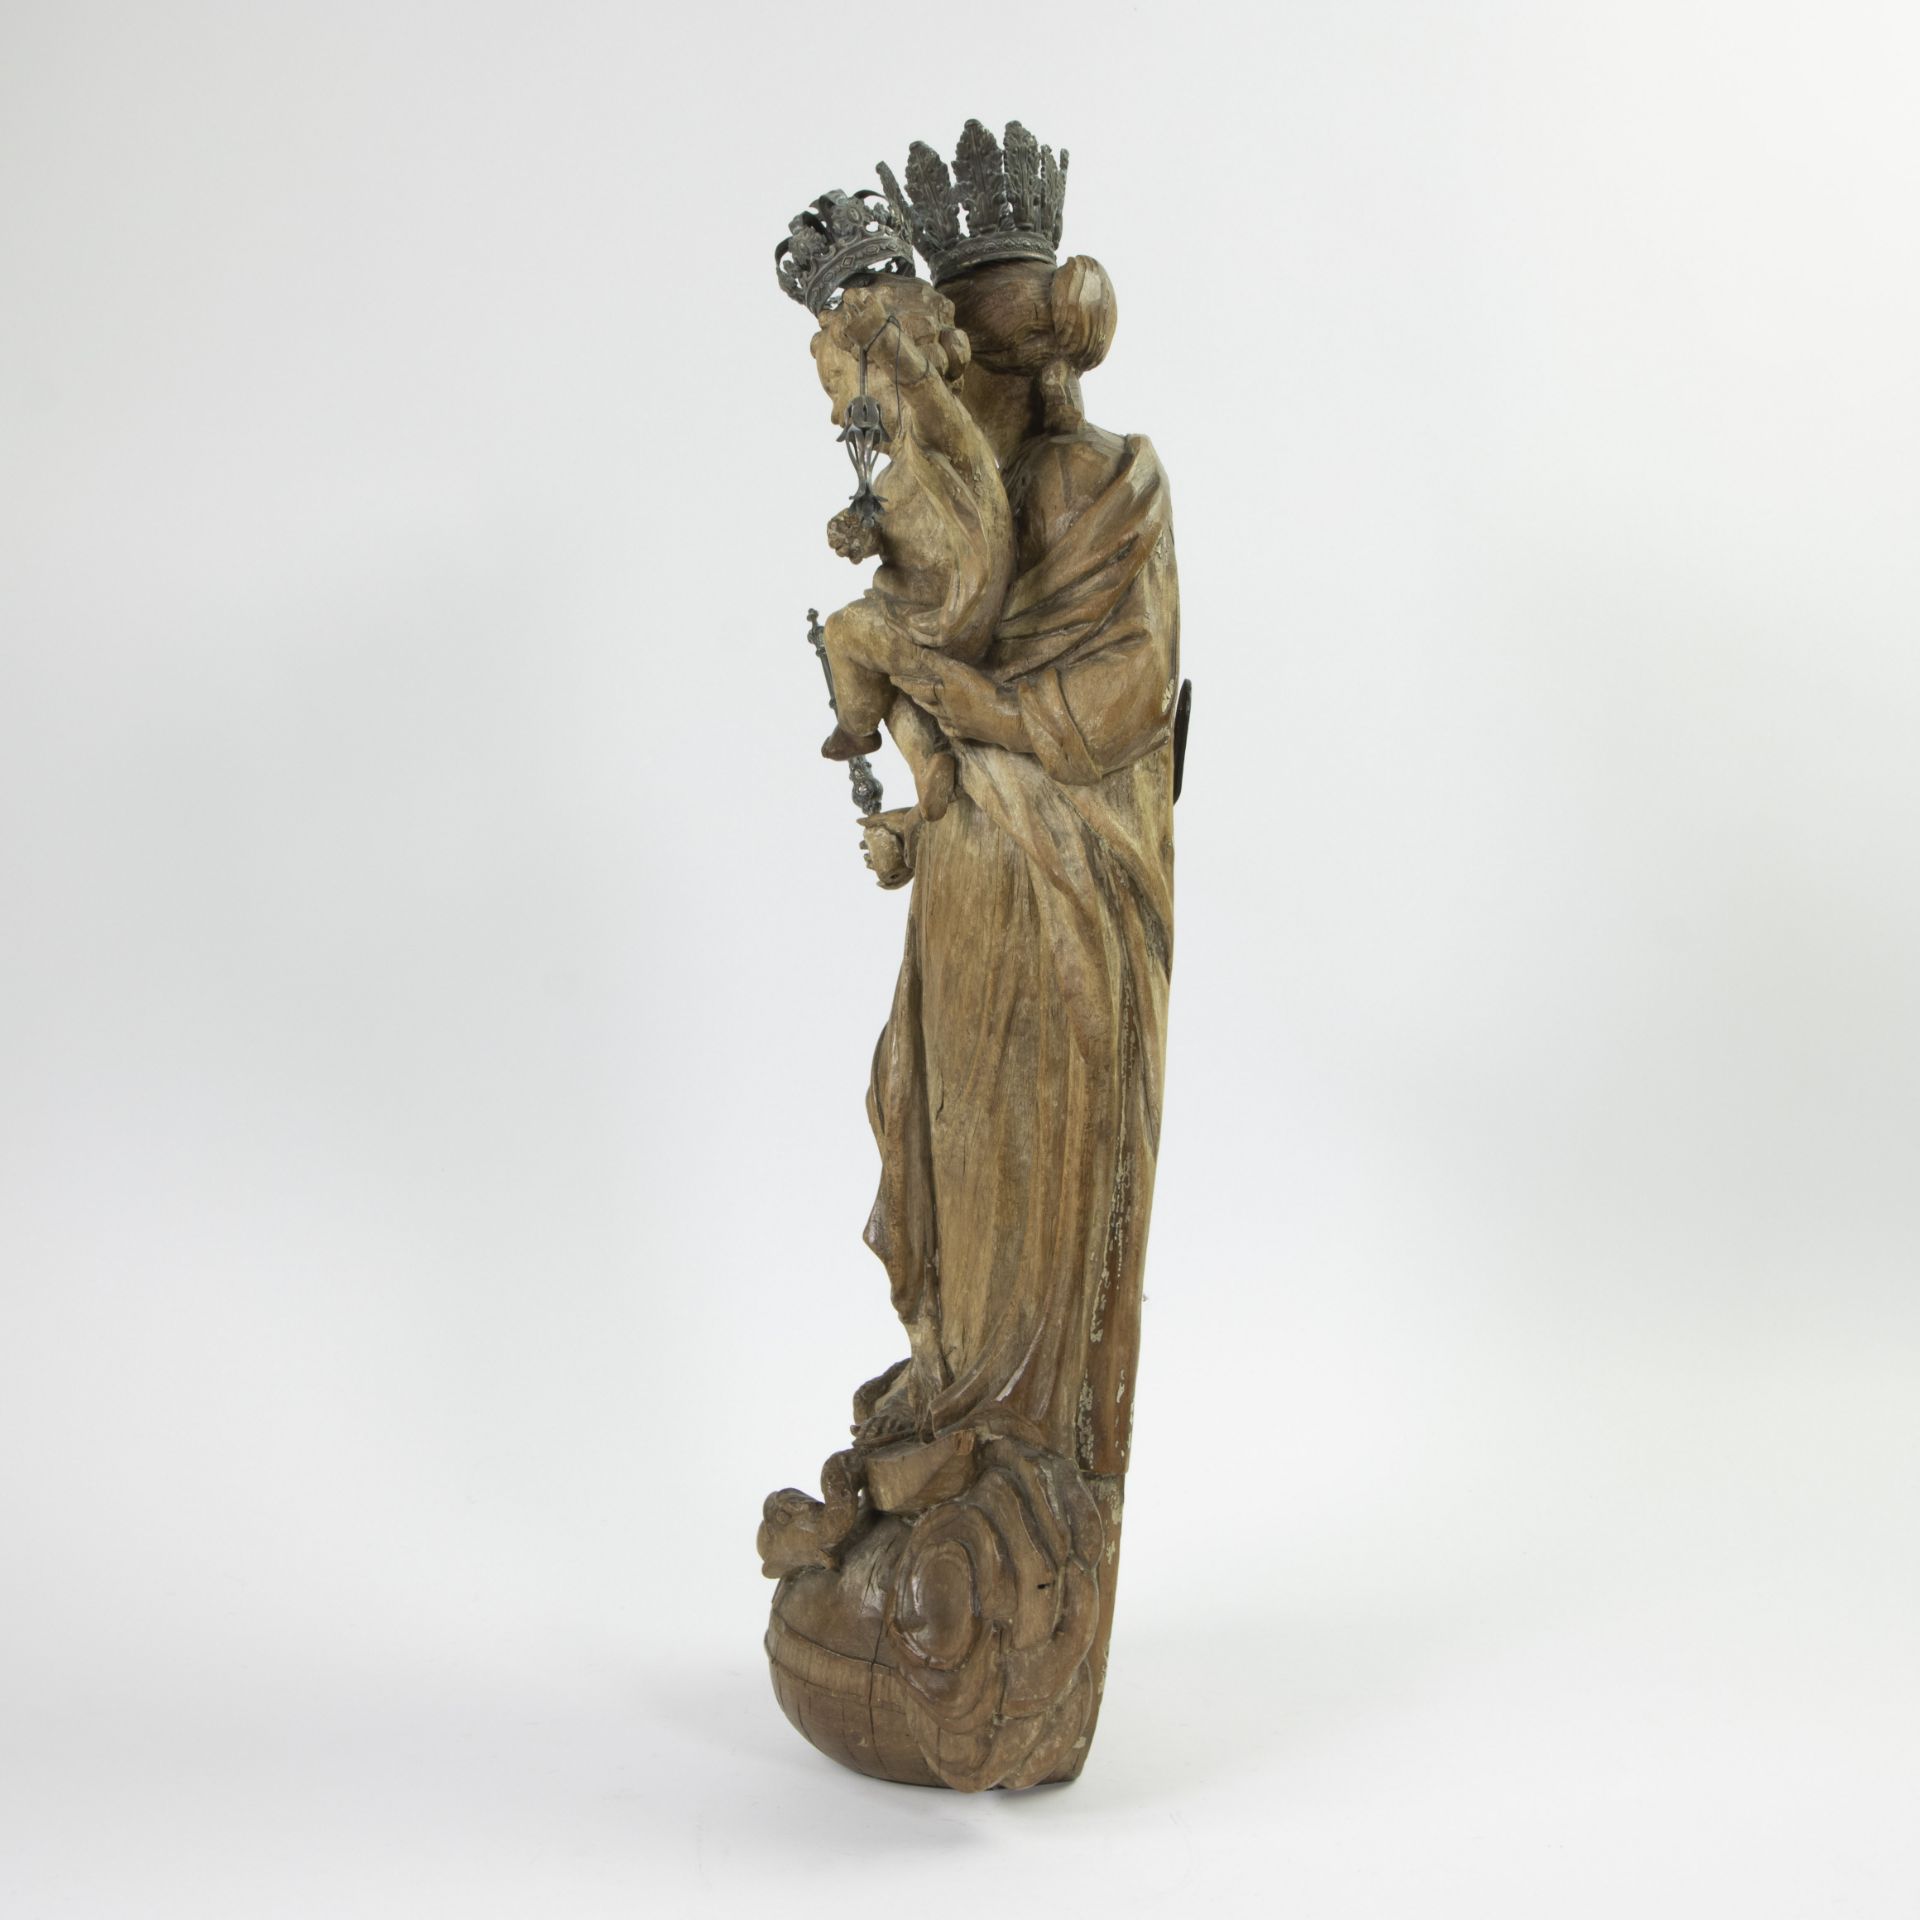 Madonna and child on globe and crescent moon, oak wood, 18th century, traces of polychromy - Image 2 of 4